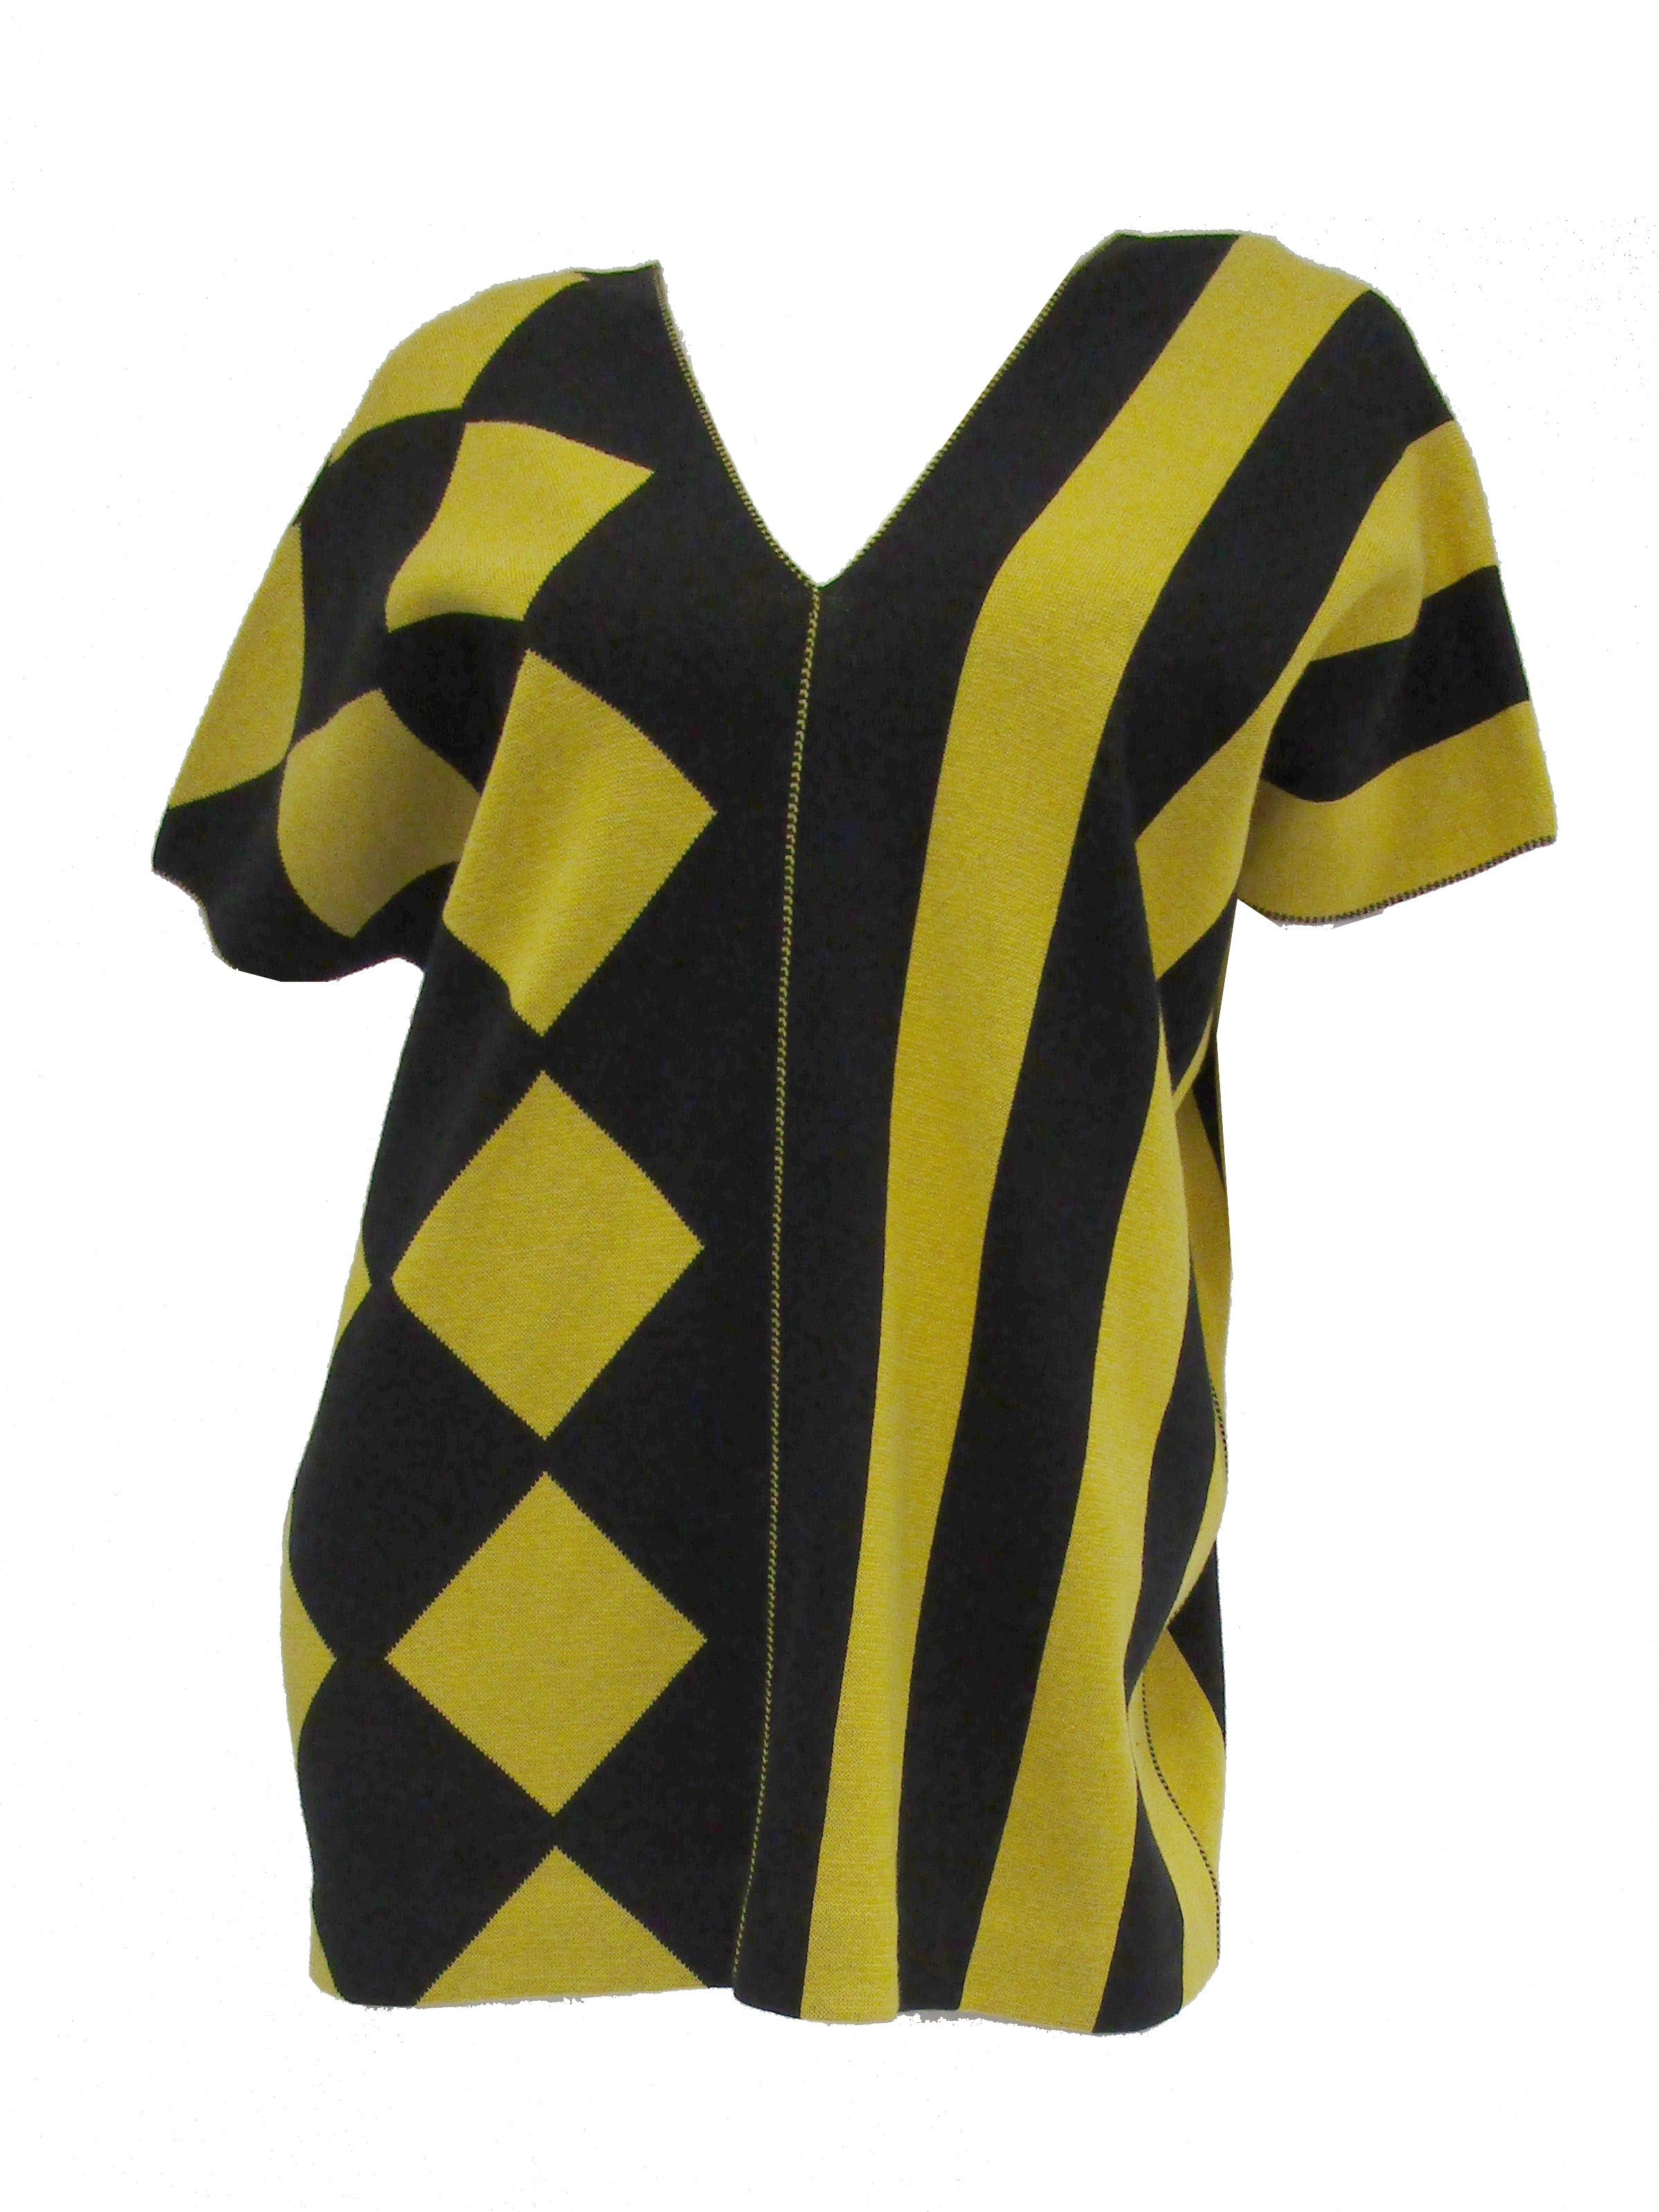 s Issey Miyake Yellow and Black Diamond and Stripe Cotton Knit Top